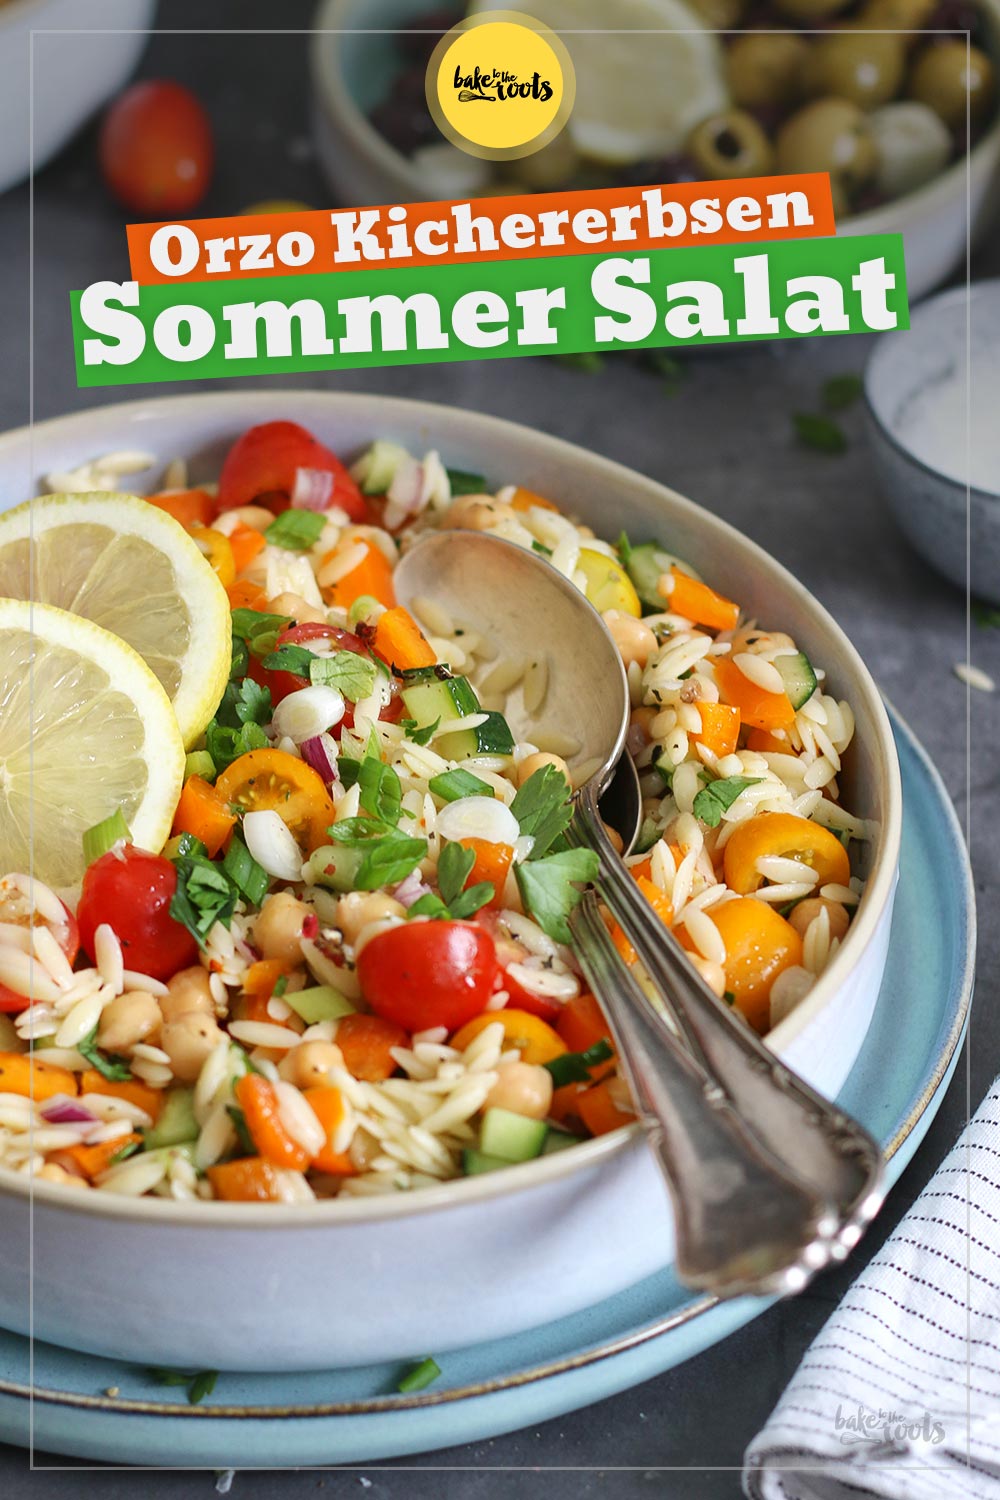 Orzo Kichererbsen Sommer Salat | Bake to the roots